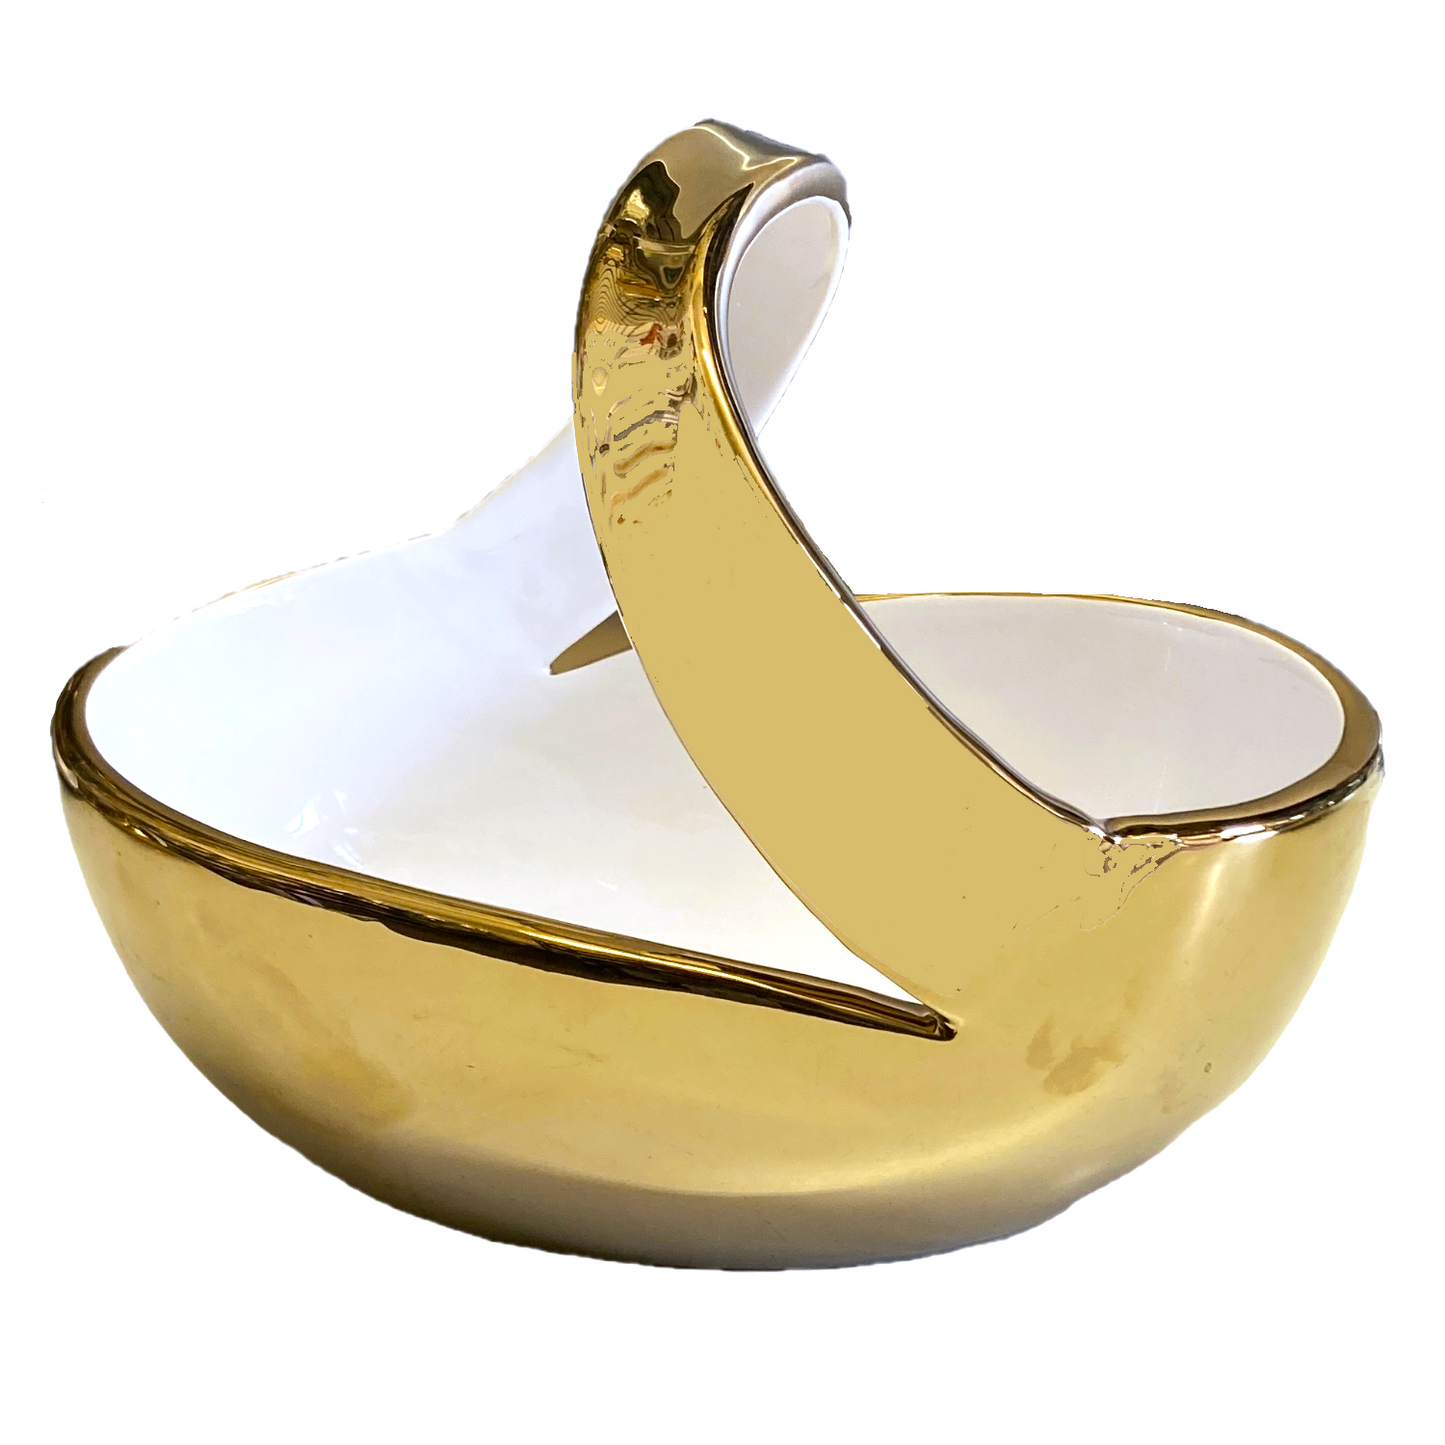 Gold Plated Decorative Bowl